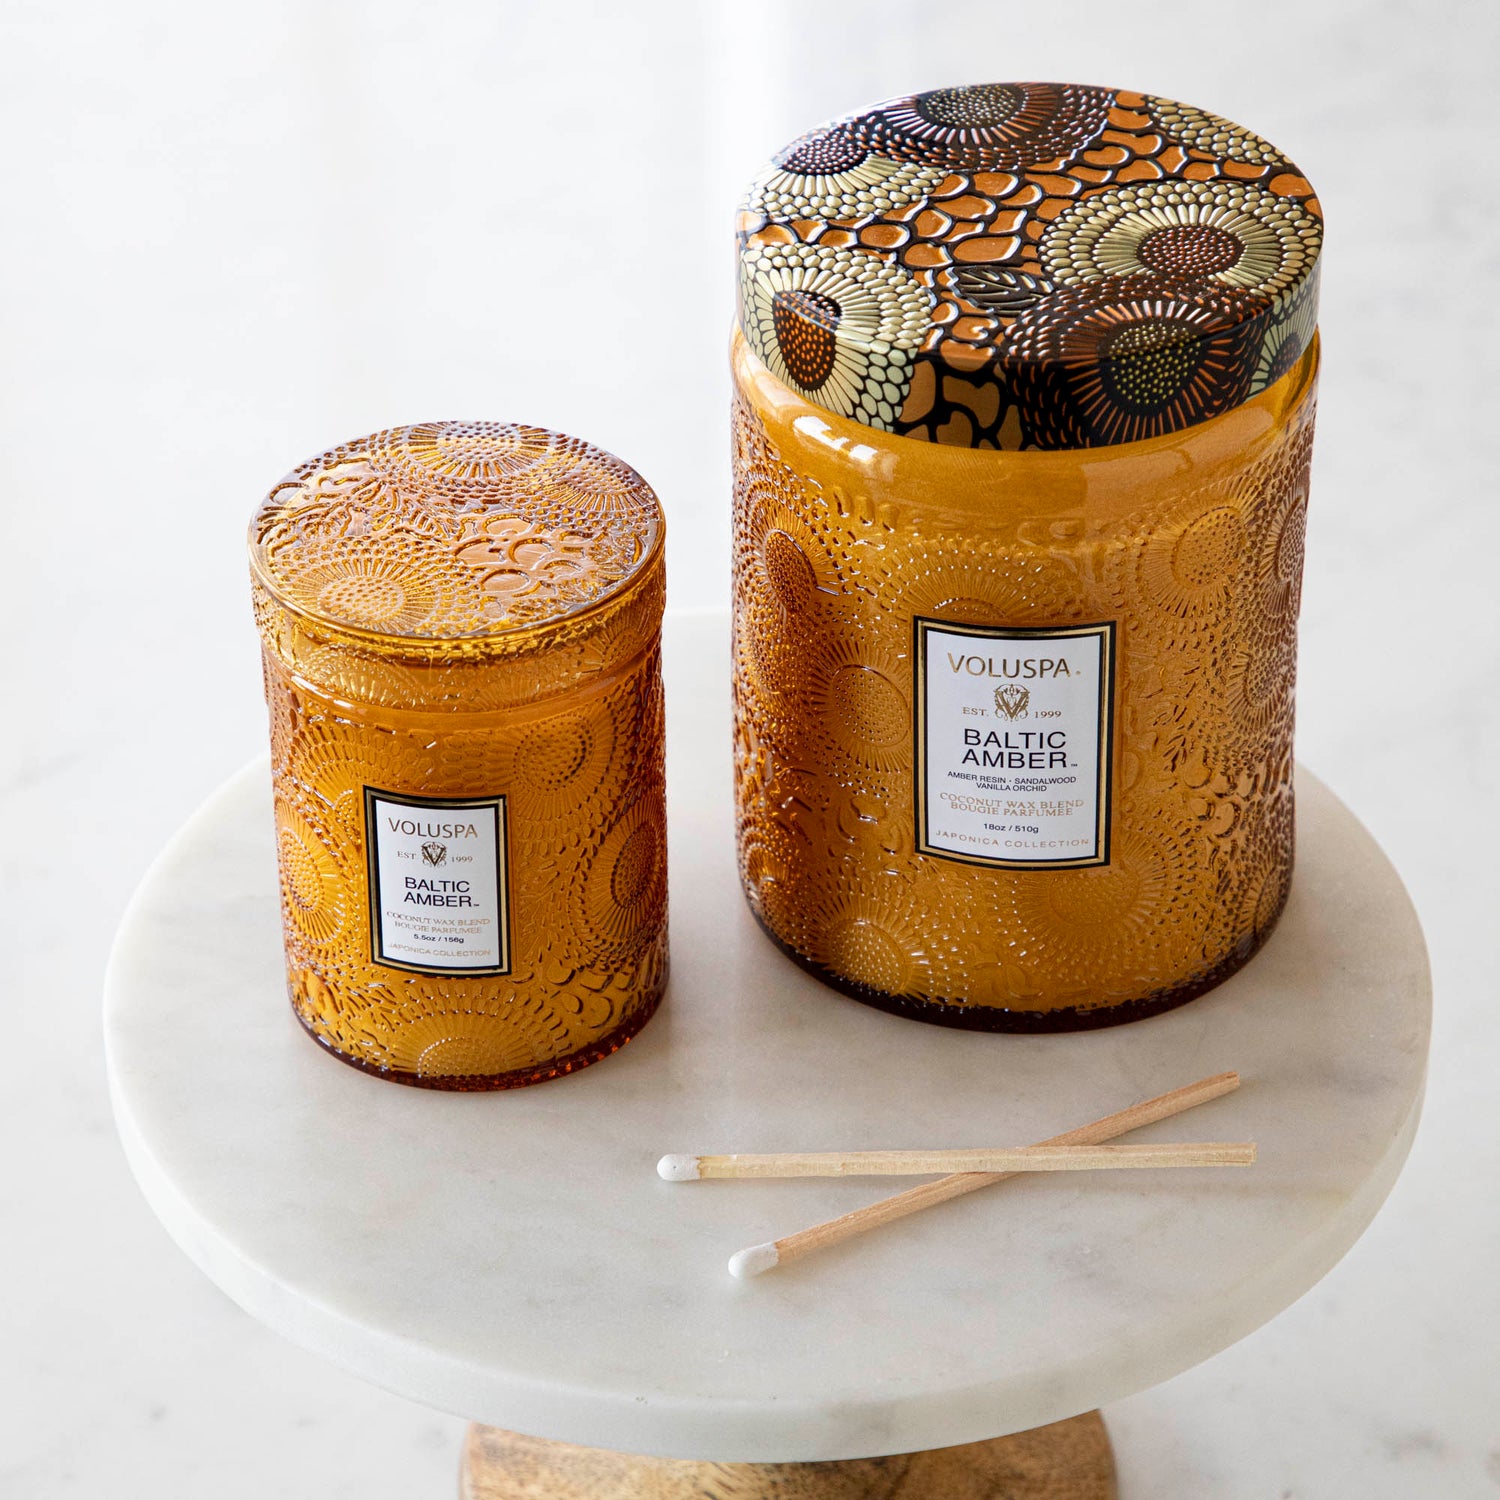 Two Voluspa Baltic Amber candles with matches on a marble surface.